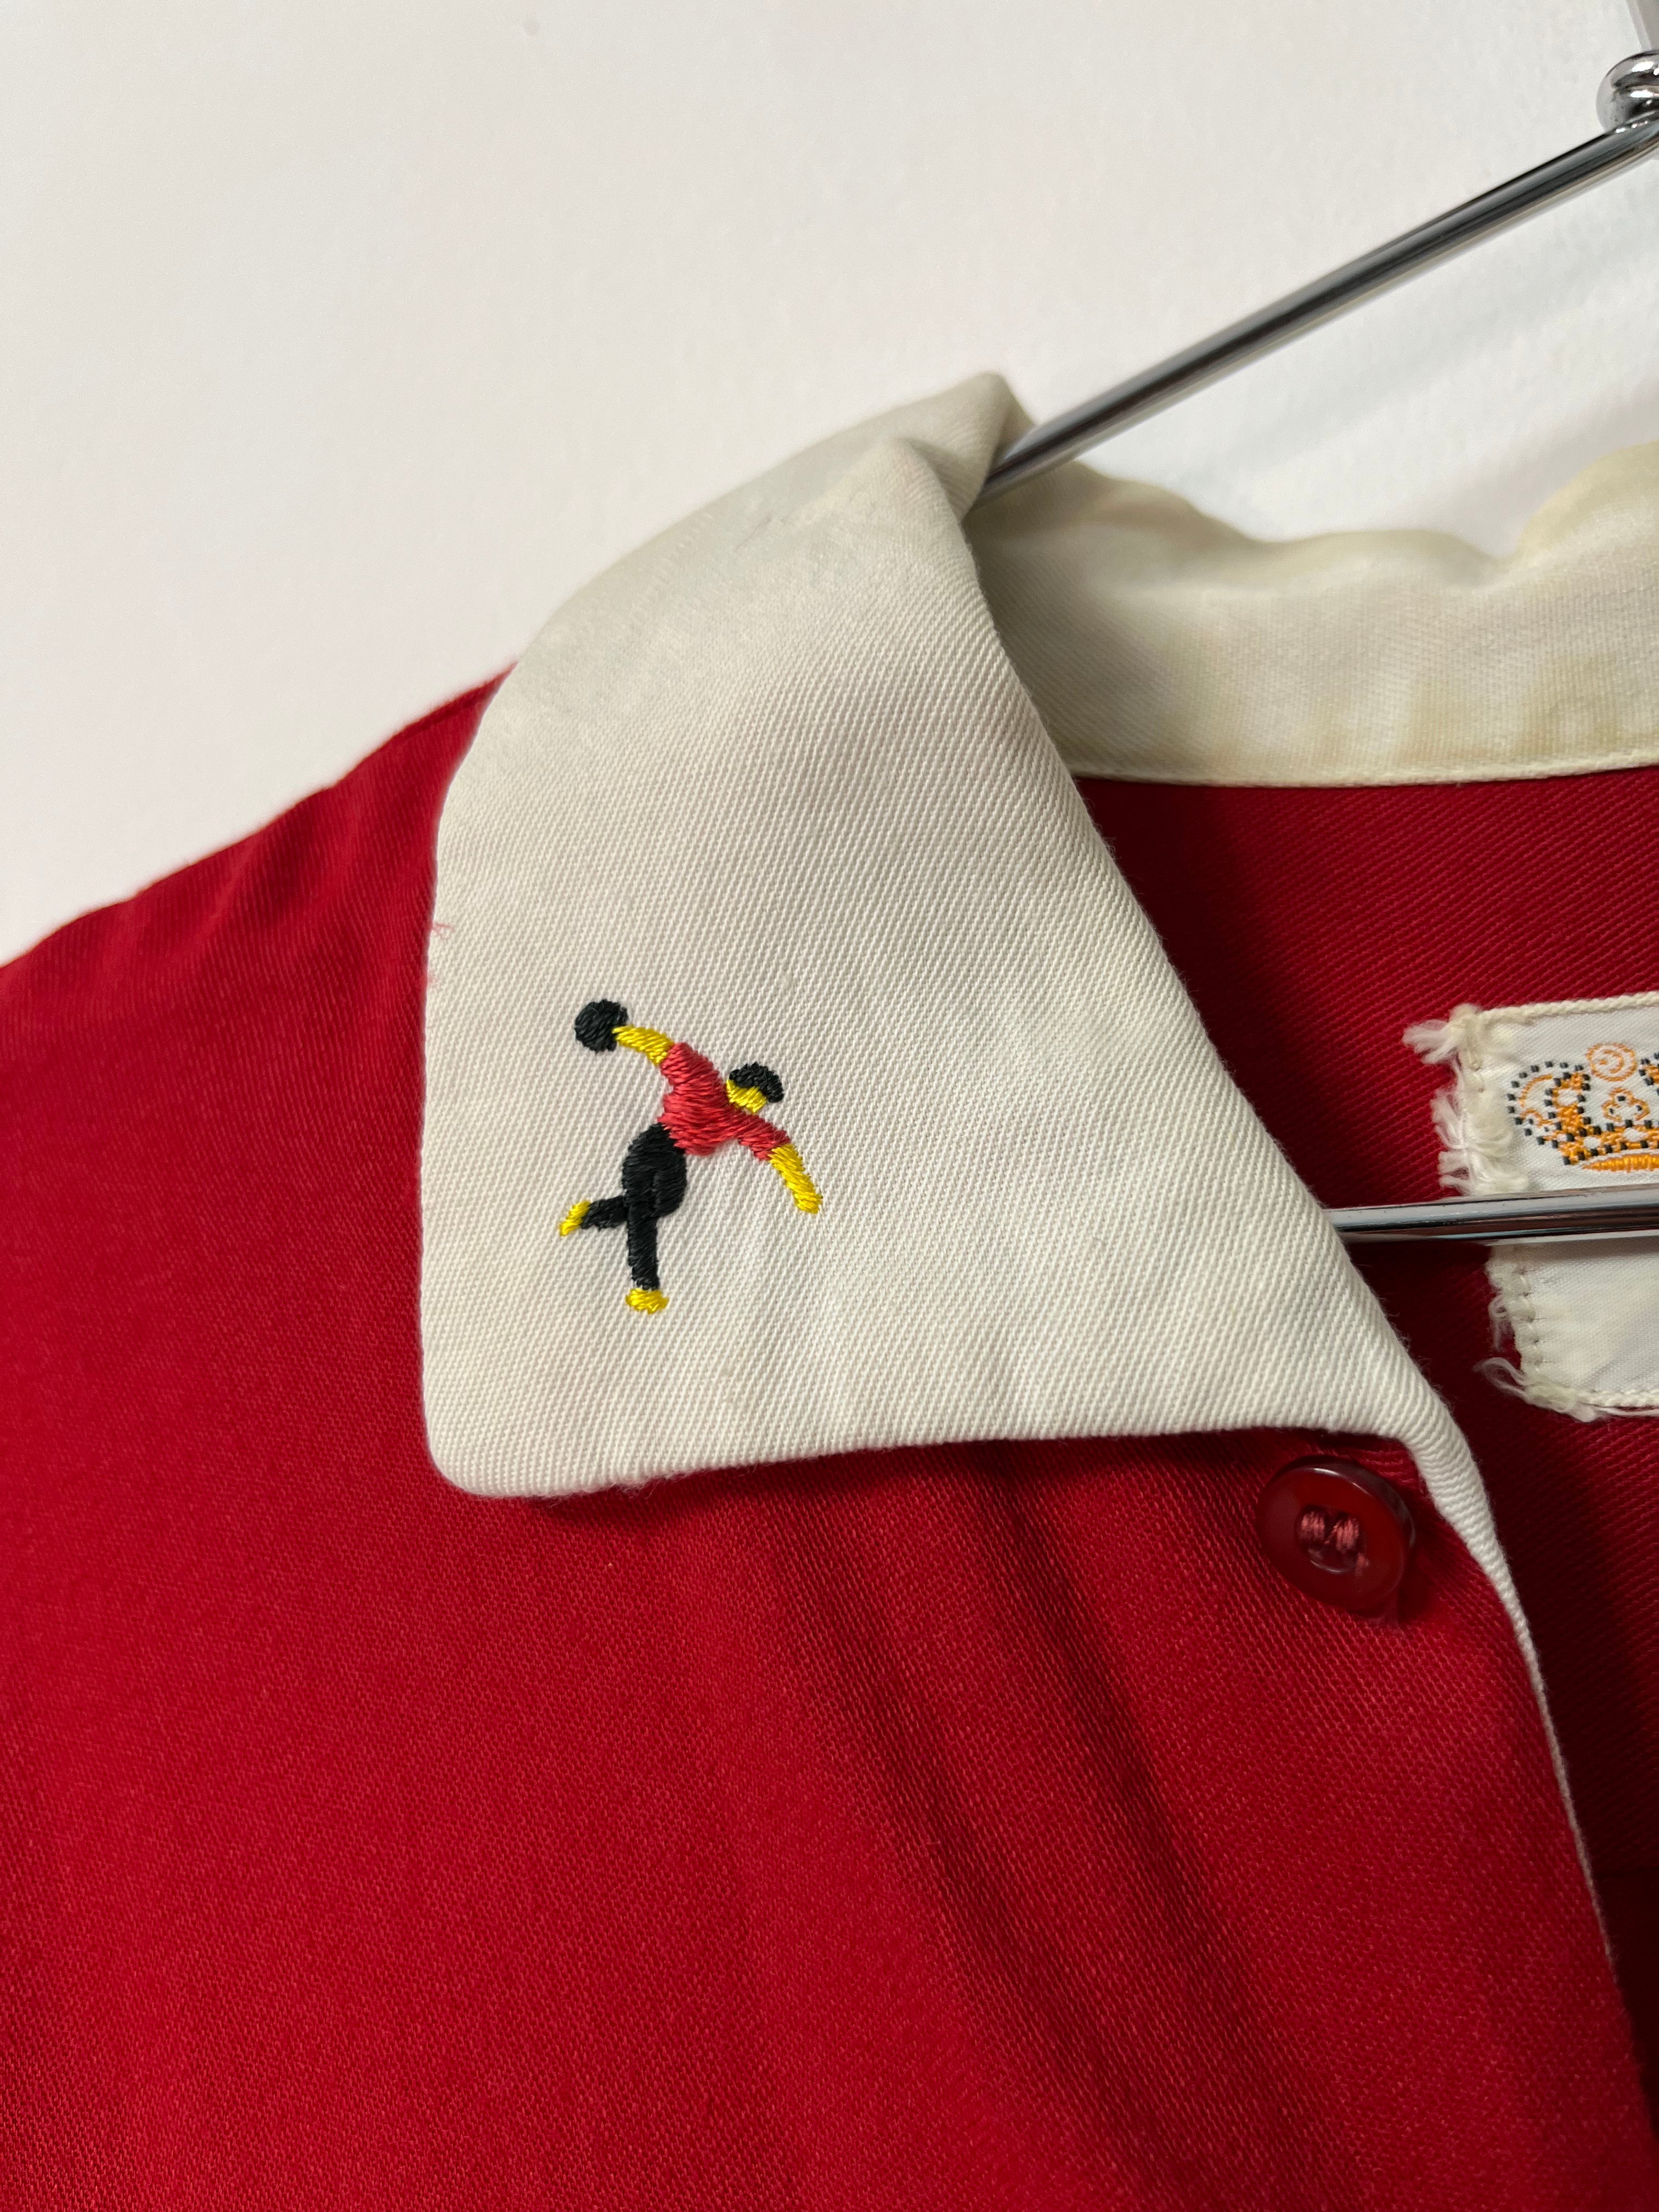 1950s King Louie by Holiday ‘Jerry’s Ming House’ Chinese Restaurant Loop Collar Bowling Shirt - Scarlet Red - M